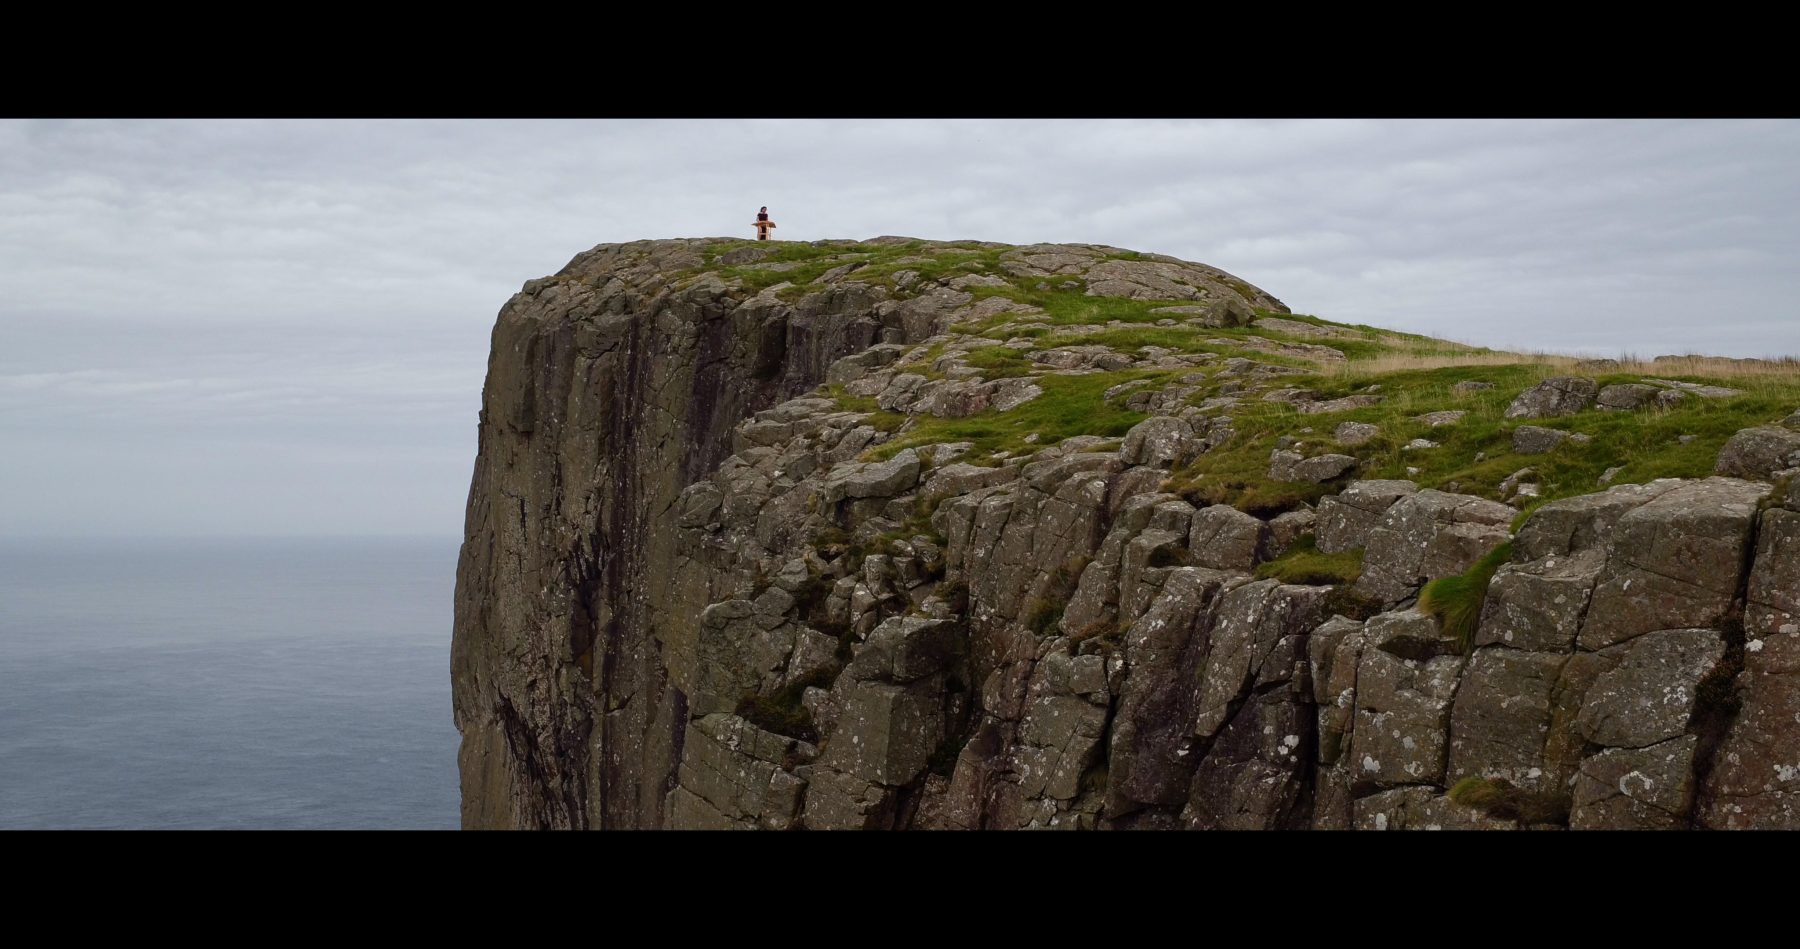 Angela Josephine on a clifftop for 40 Days in Ireland